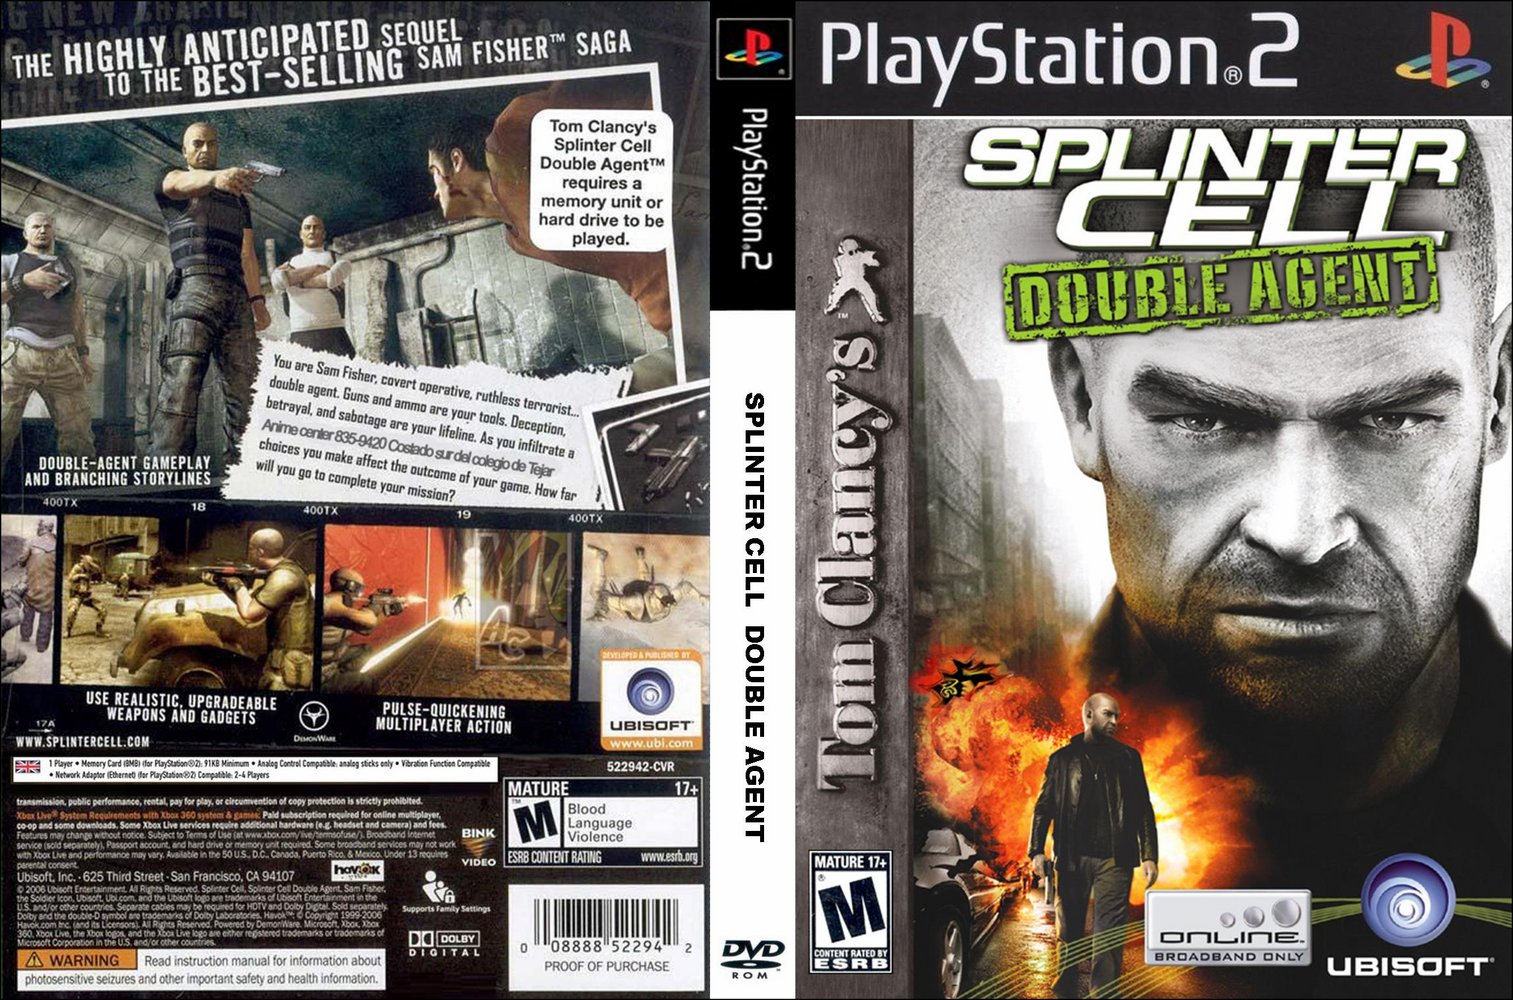 Splinter cell double agent crack - free download - (23 files)